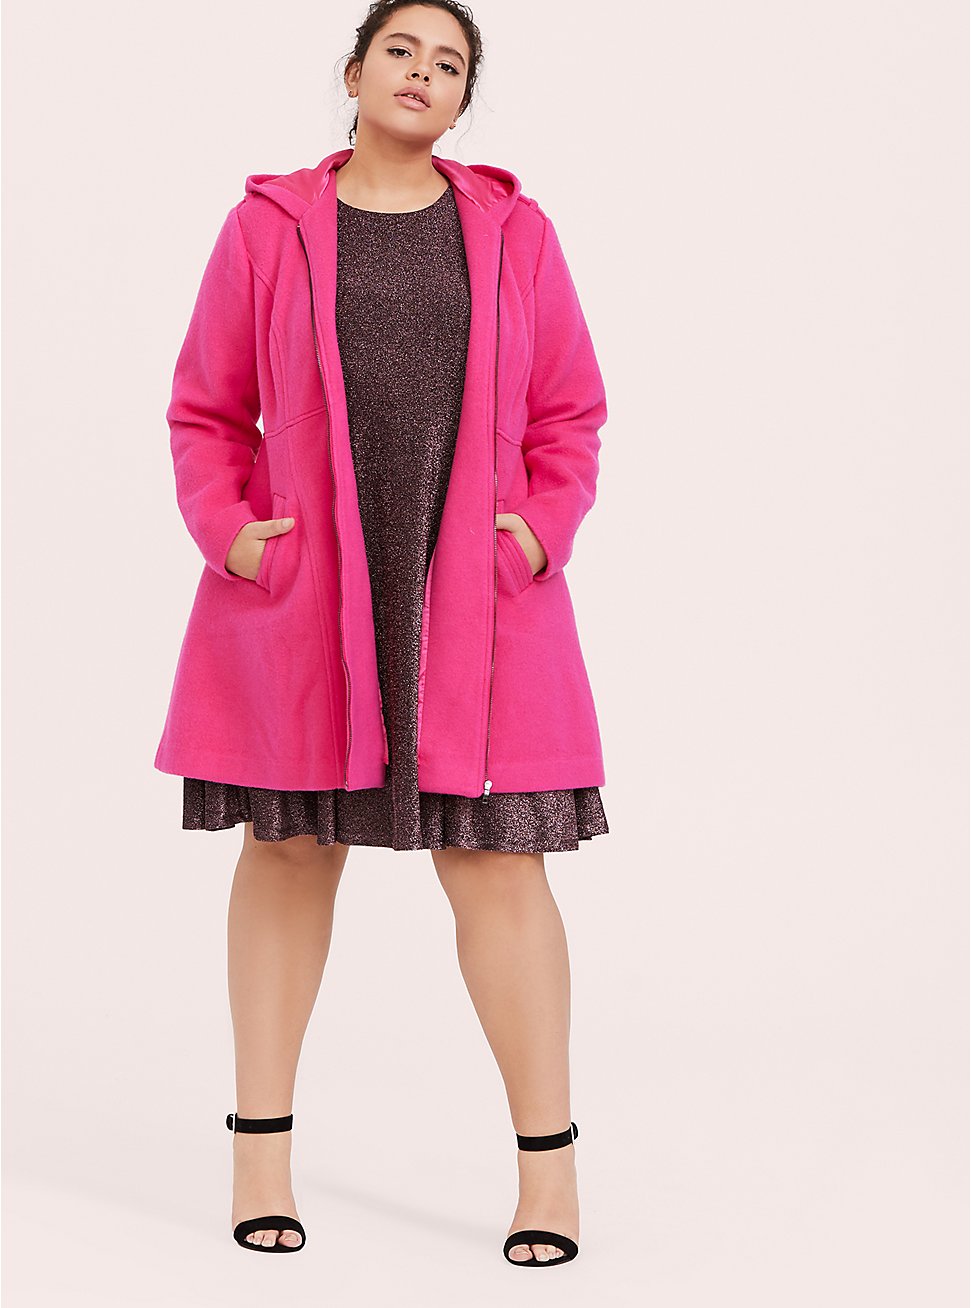 Plus Size - Neon Pink Hacci Hooded Fit & Flare Coat - Torrid